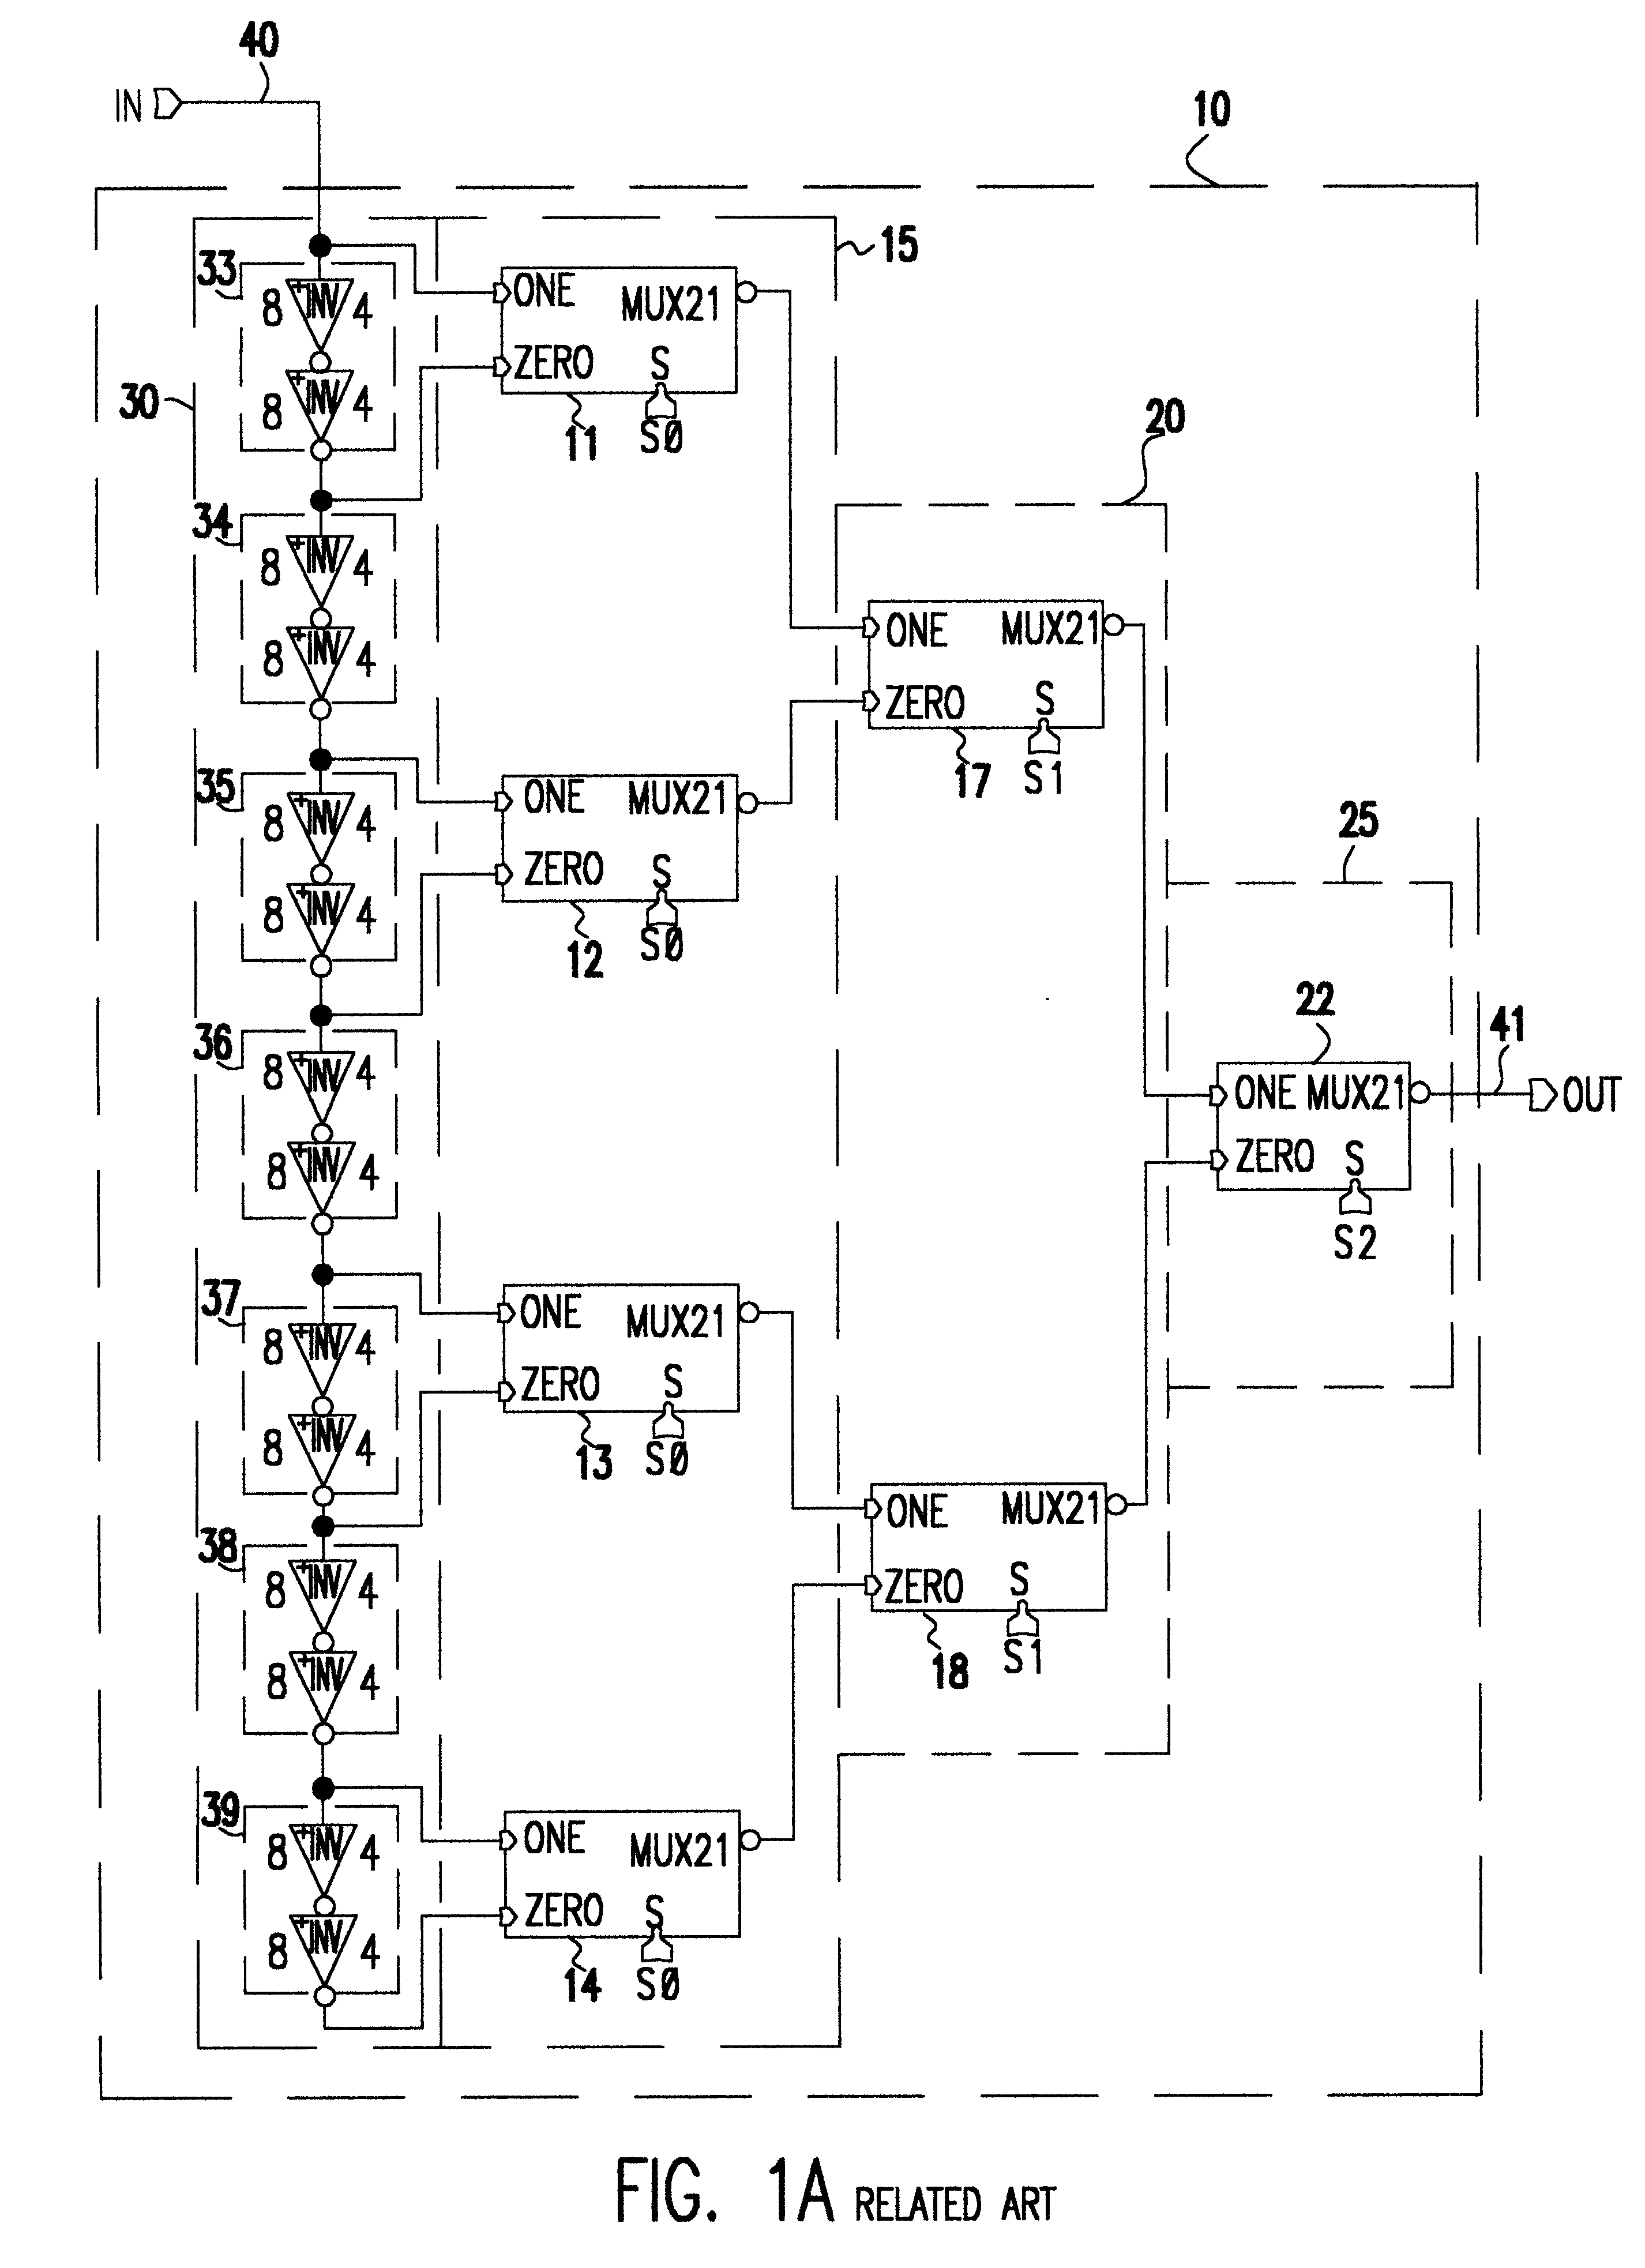 Digital delay line with low insertion delay